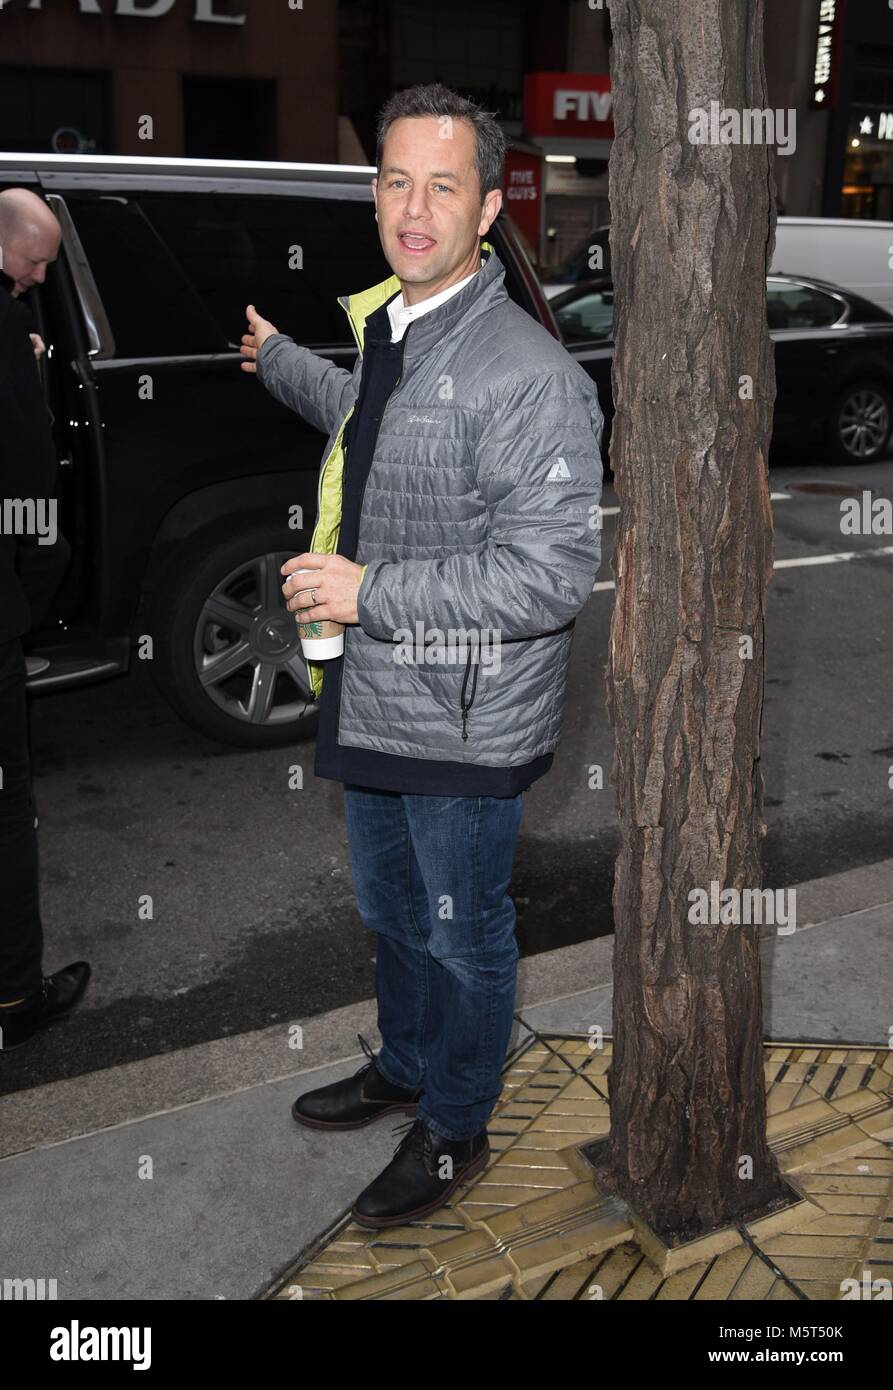 New York, NY, USA. 26th Feb, 2018. Kirk Cameron, seen at the Today Show for a Growing Pains Reunion out and about for Celebrity Candids - MON, New York, NY February 26, 2018. Credit: Derek Storm/Everett Collection/Alamy Live News Stock Photo